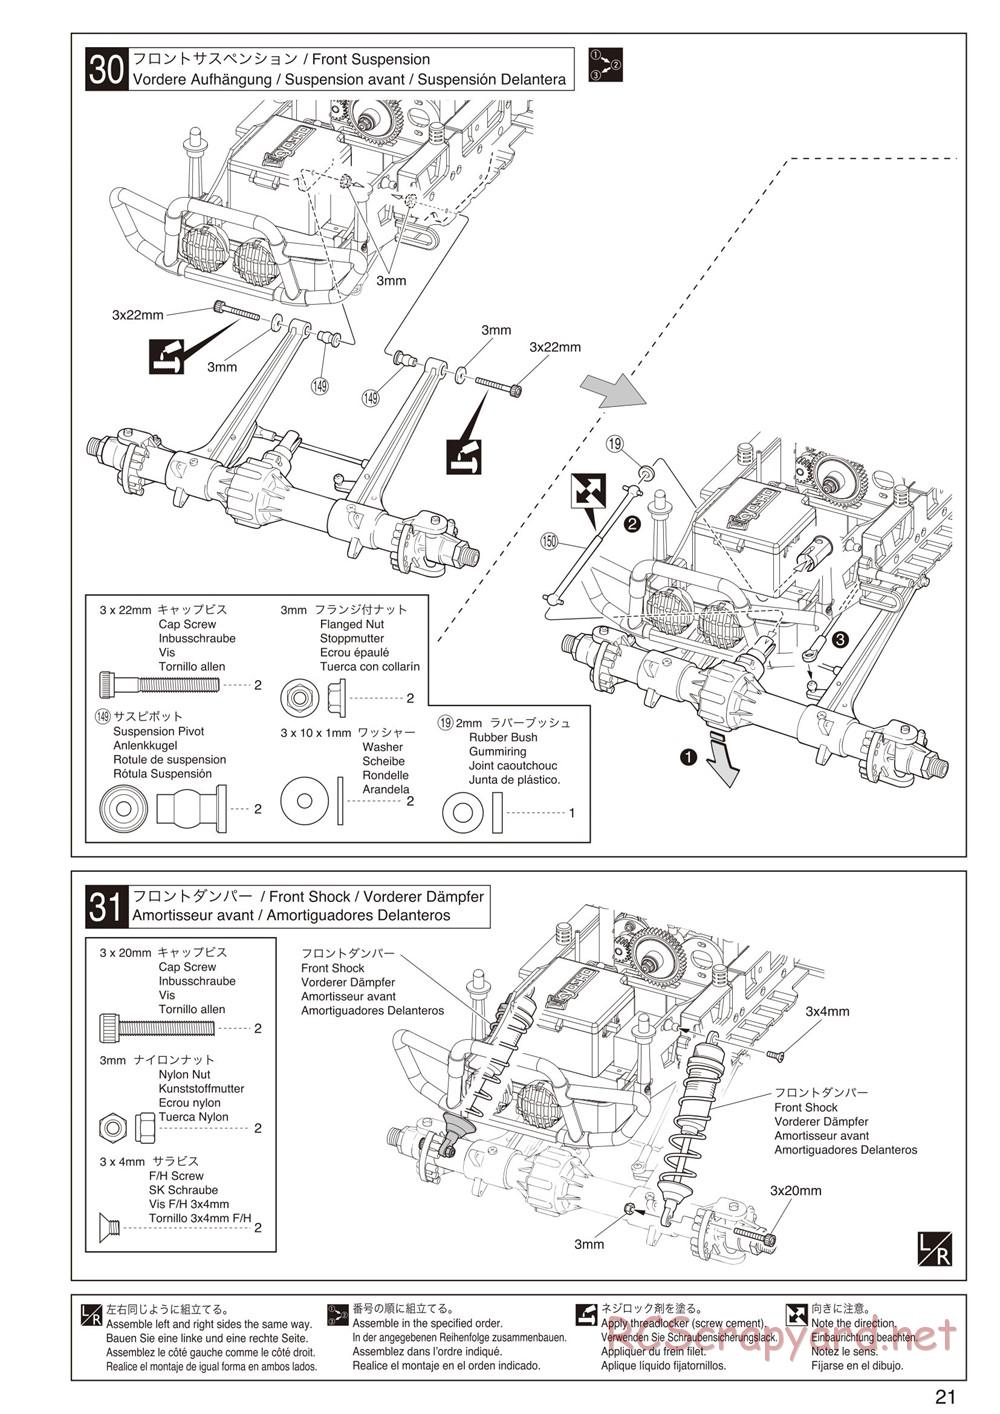 Kyosho - FO-XX VE - Manual - Page 21